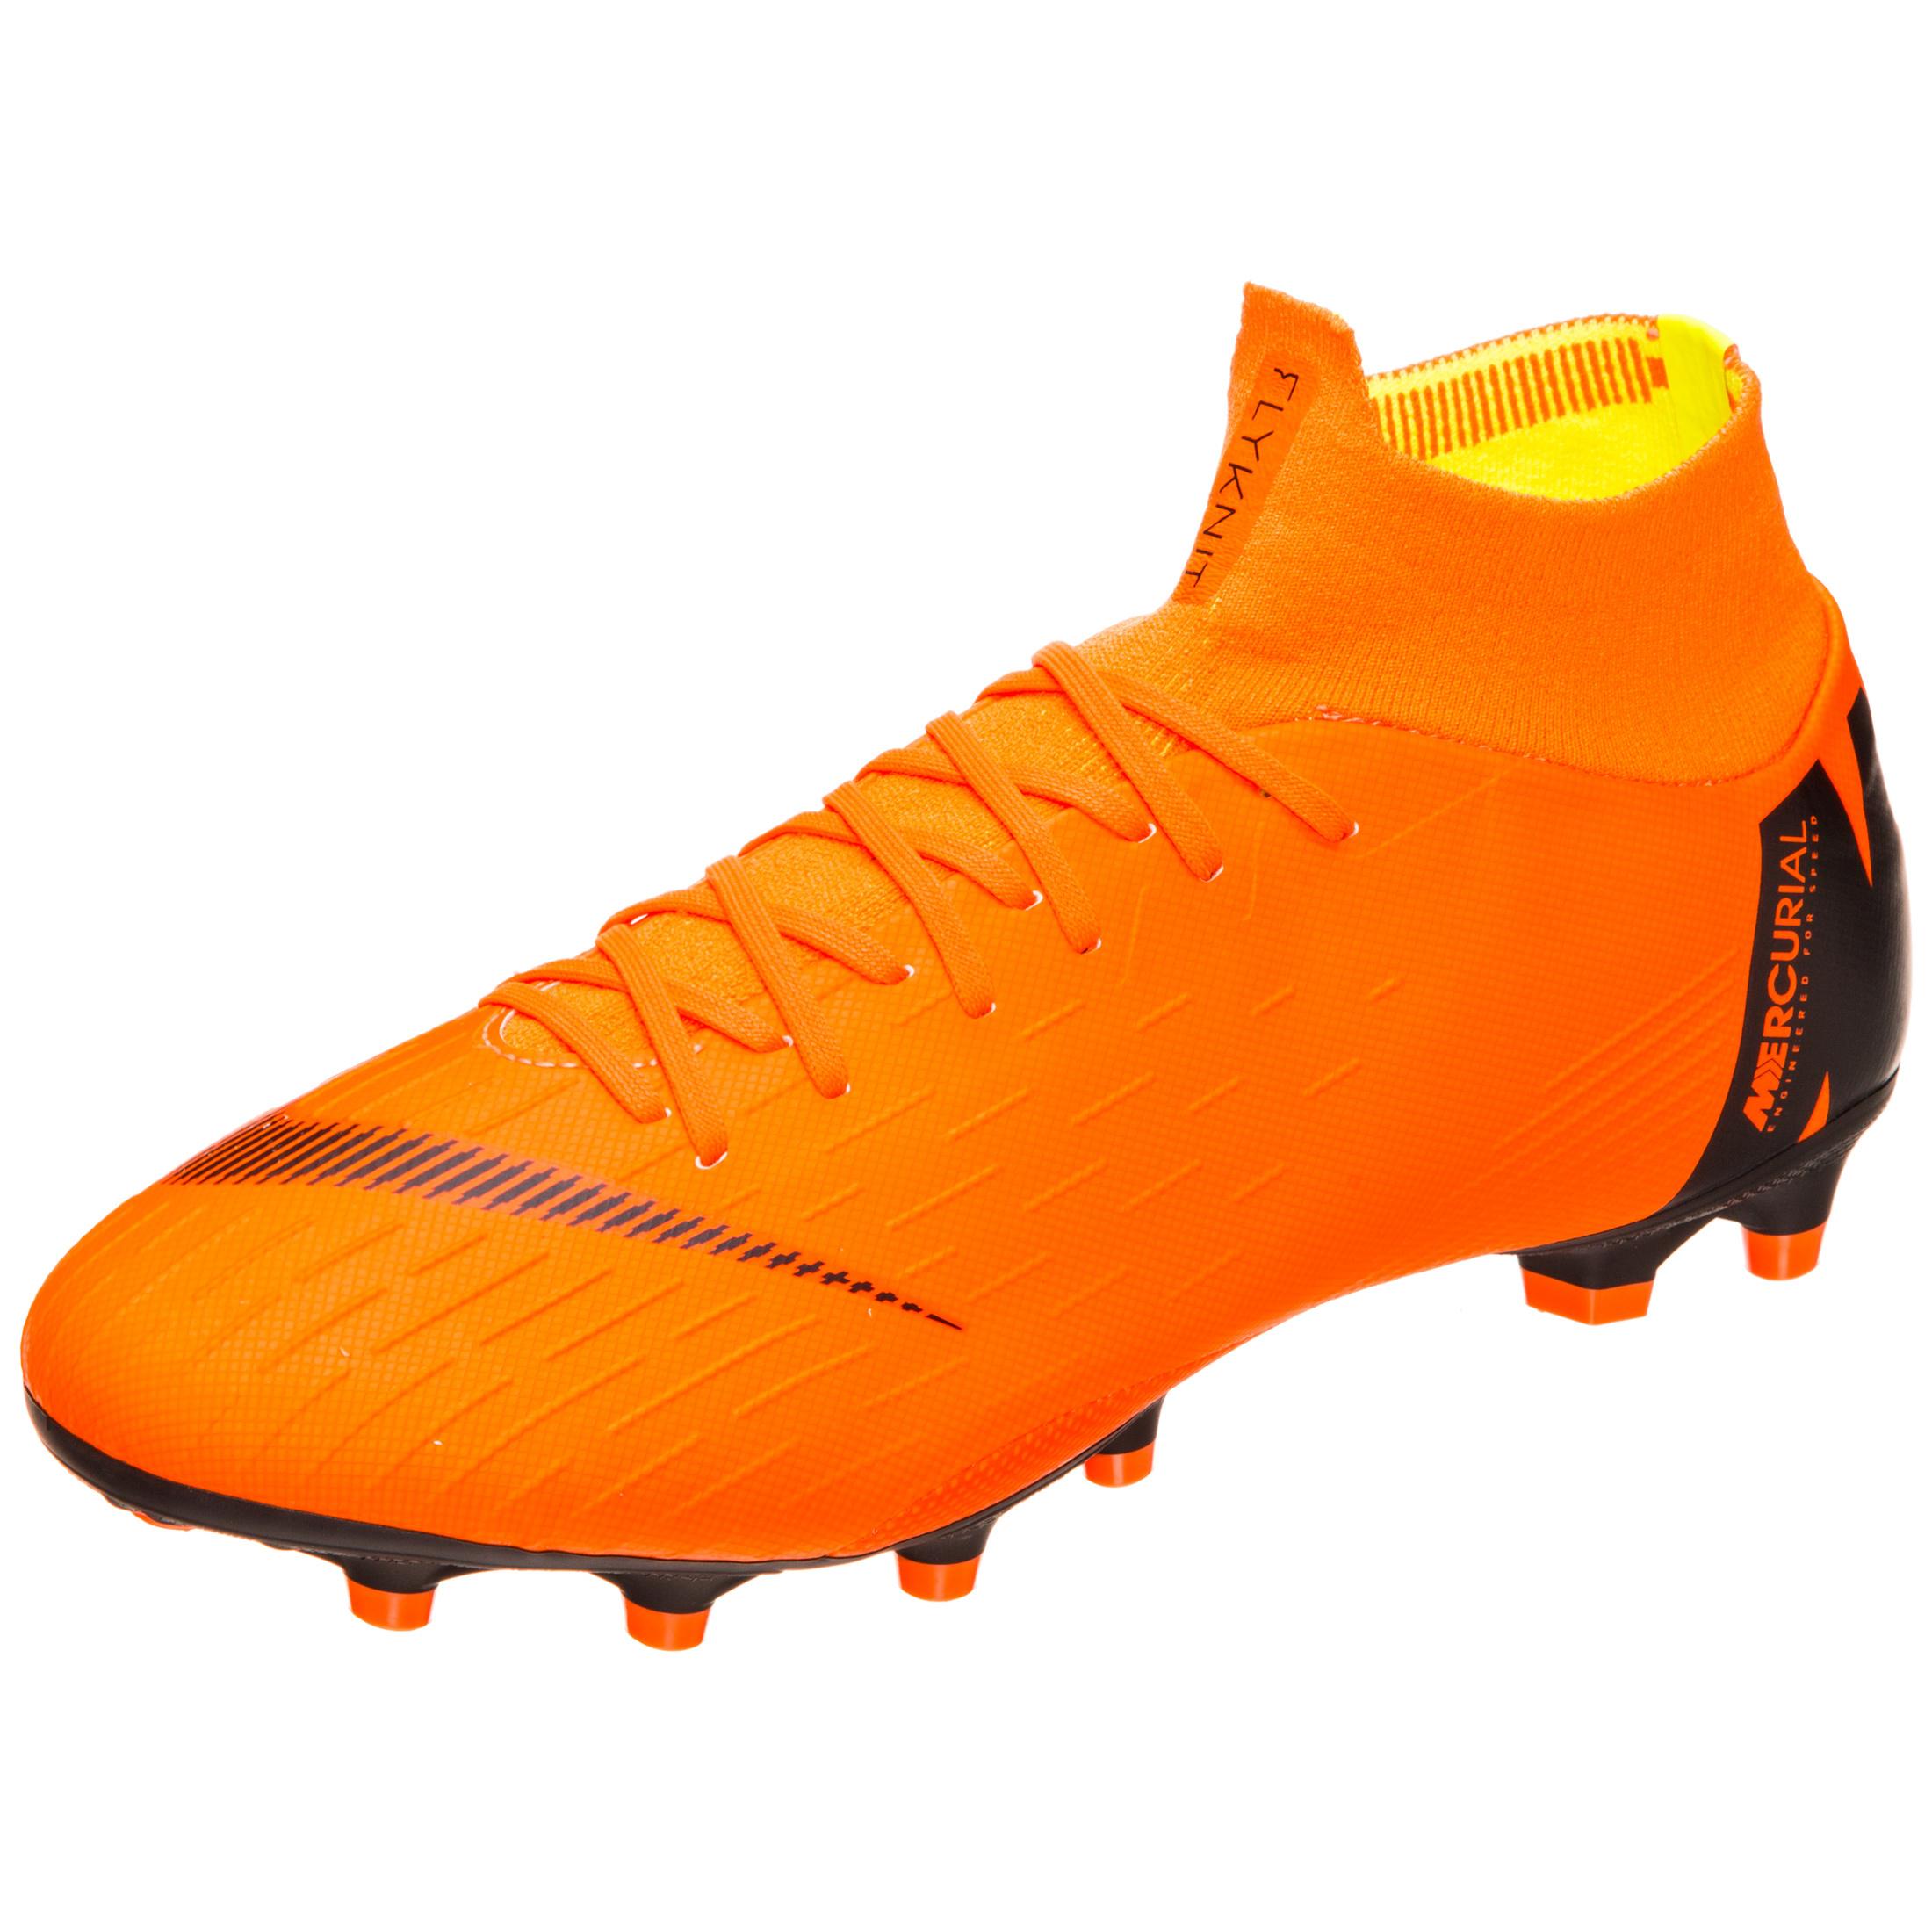 Nike Mercurial Superfly 6 Elite CR7 FG Boots Unspecified market